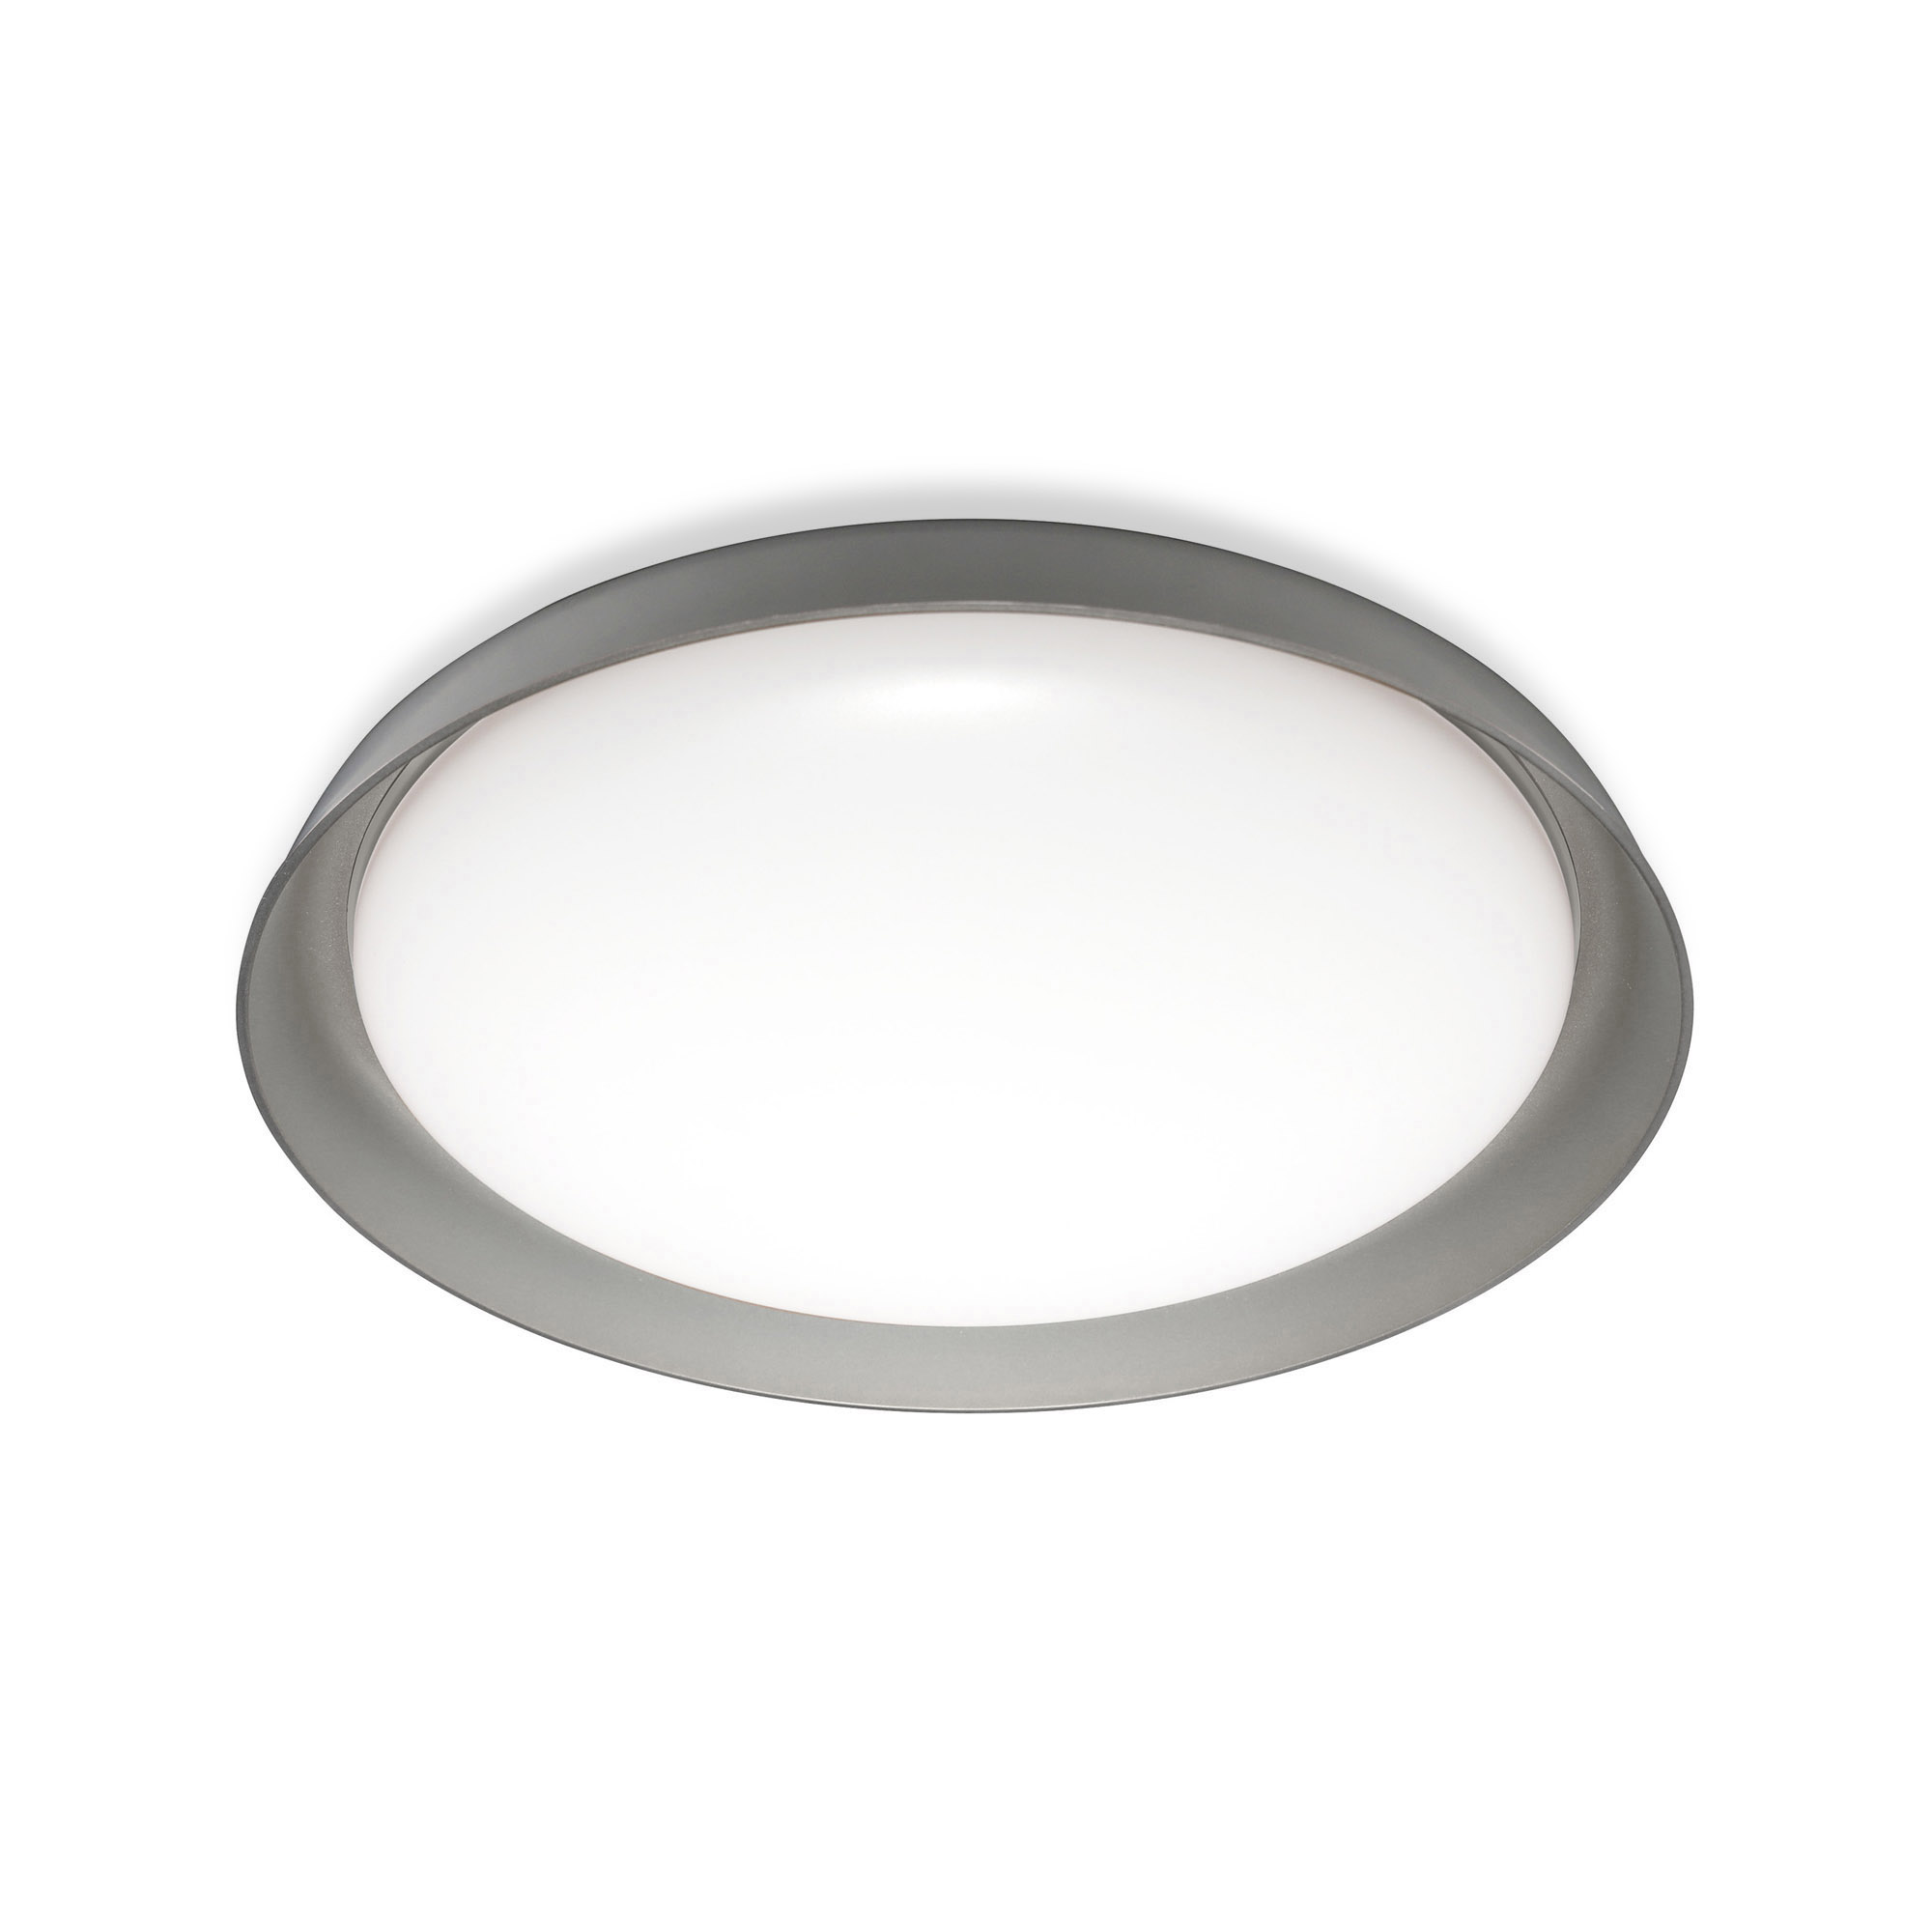 LEDVANCE SMART+ WiFi Tunable White LED Ceiling Light ORBIS Plate 430mm grey 2500lm